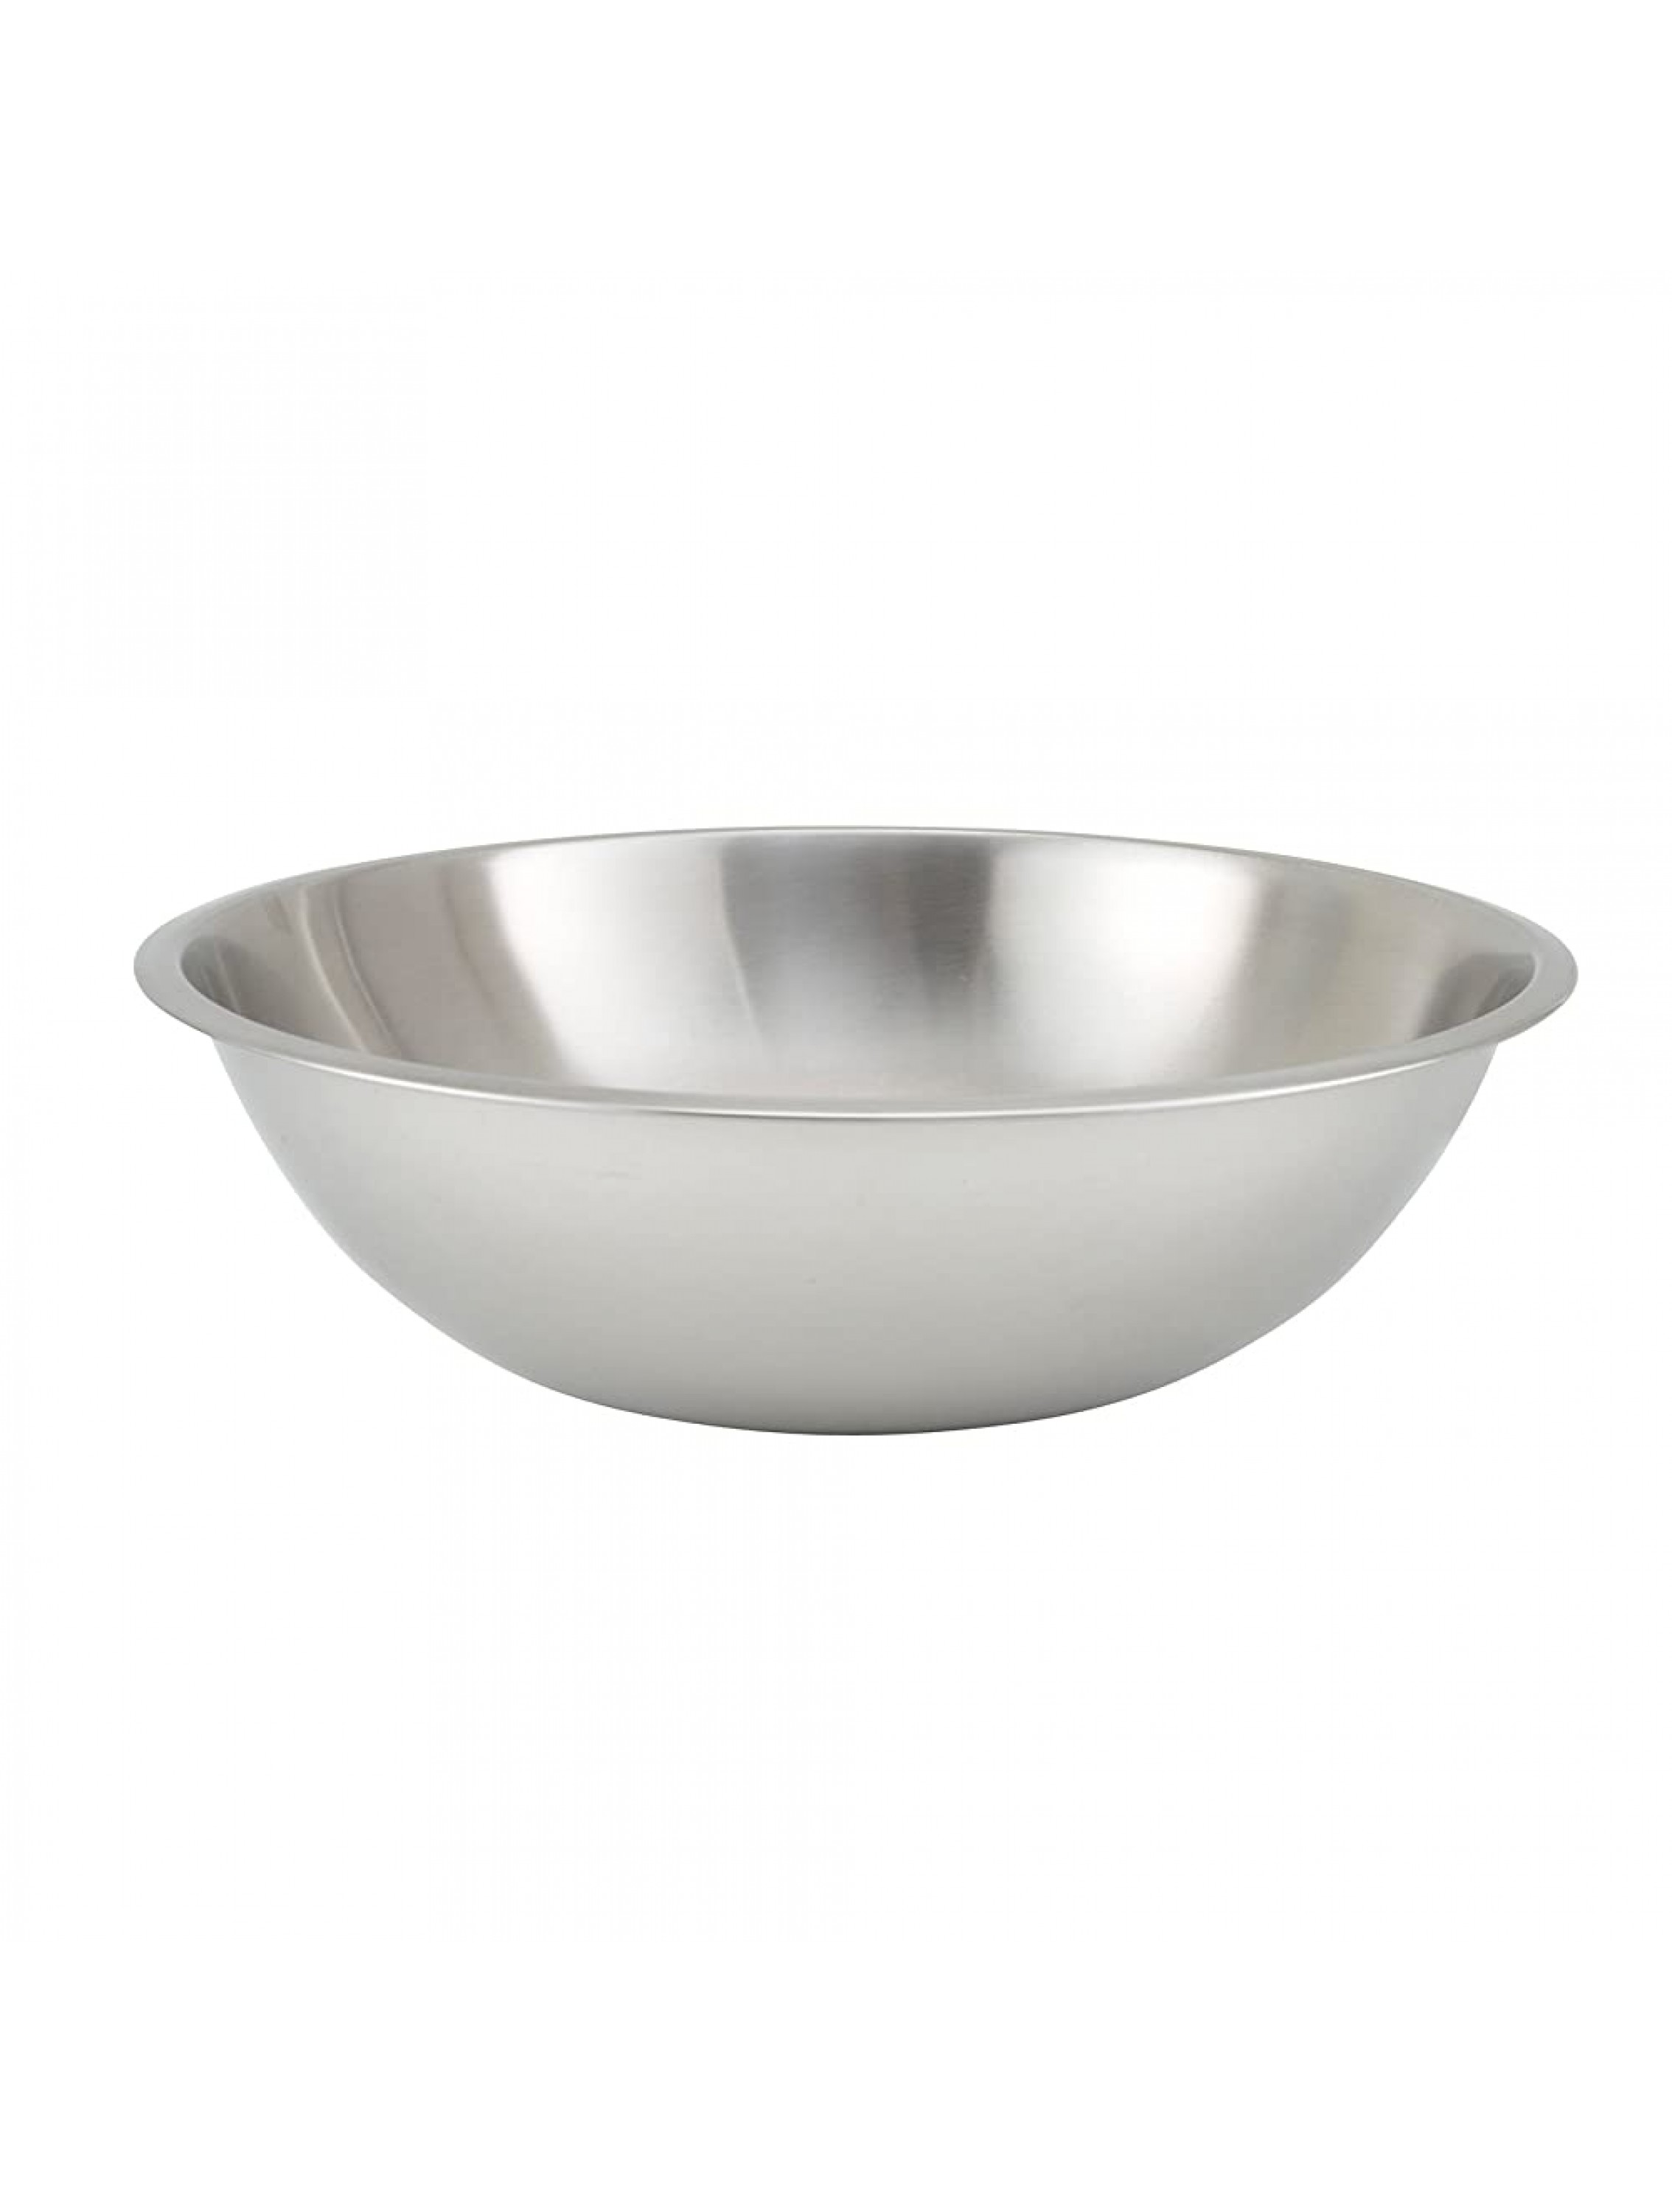 Winco MXHV-2000 Heavy-Duty Mixing Bowl 20-Quart,Stainless Steel,Medium - BFIEJAH1L